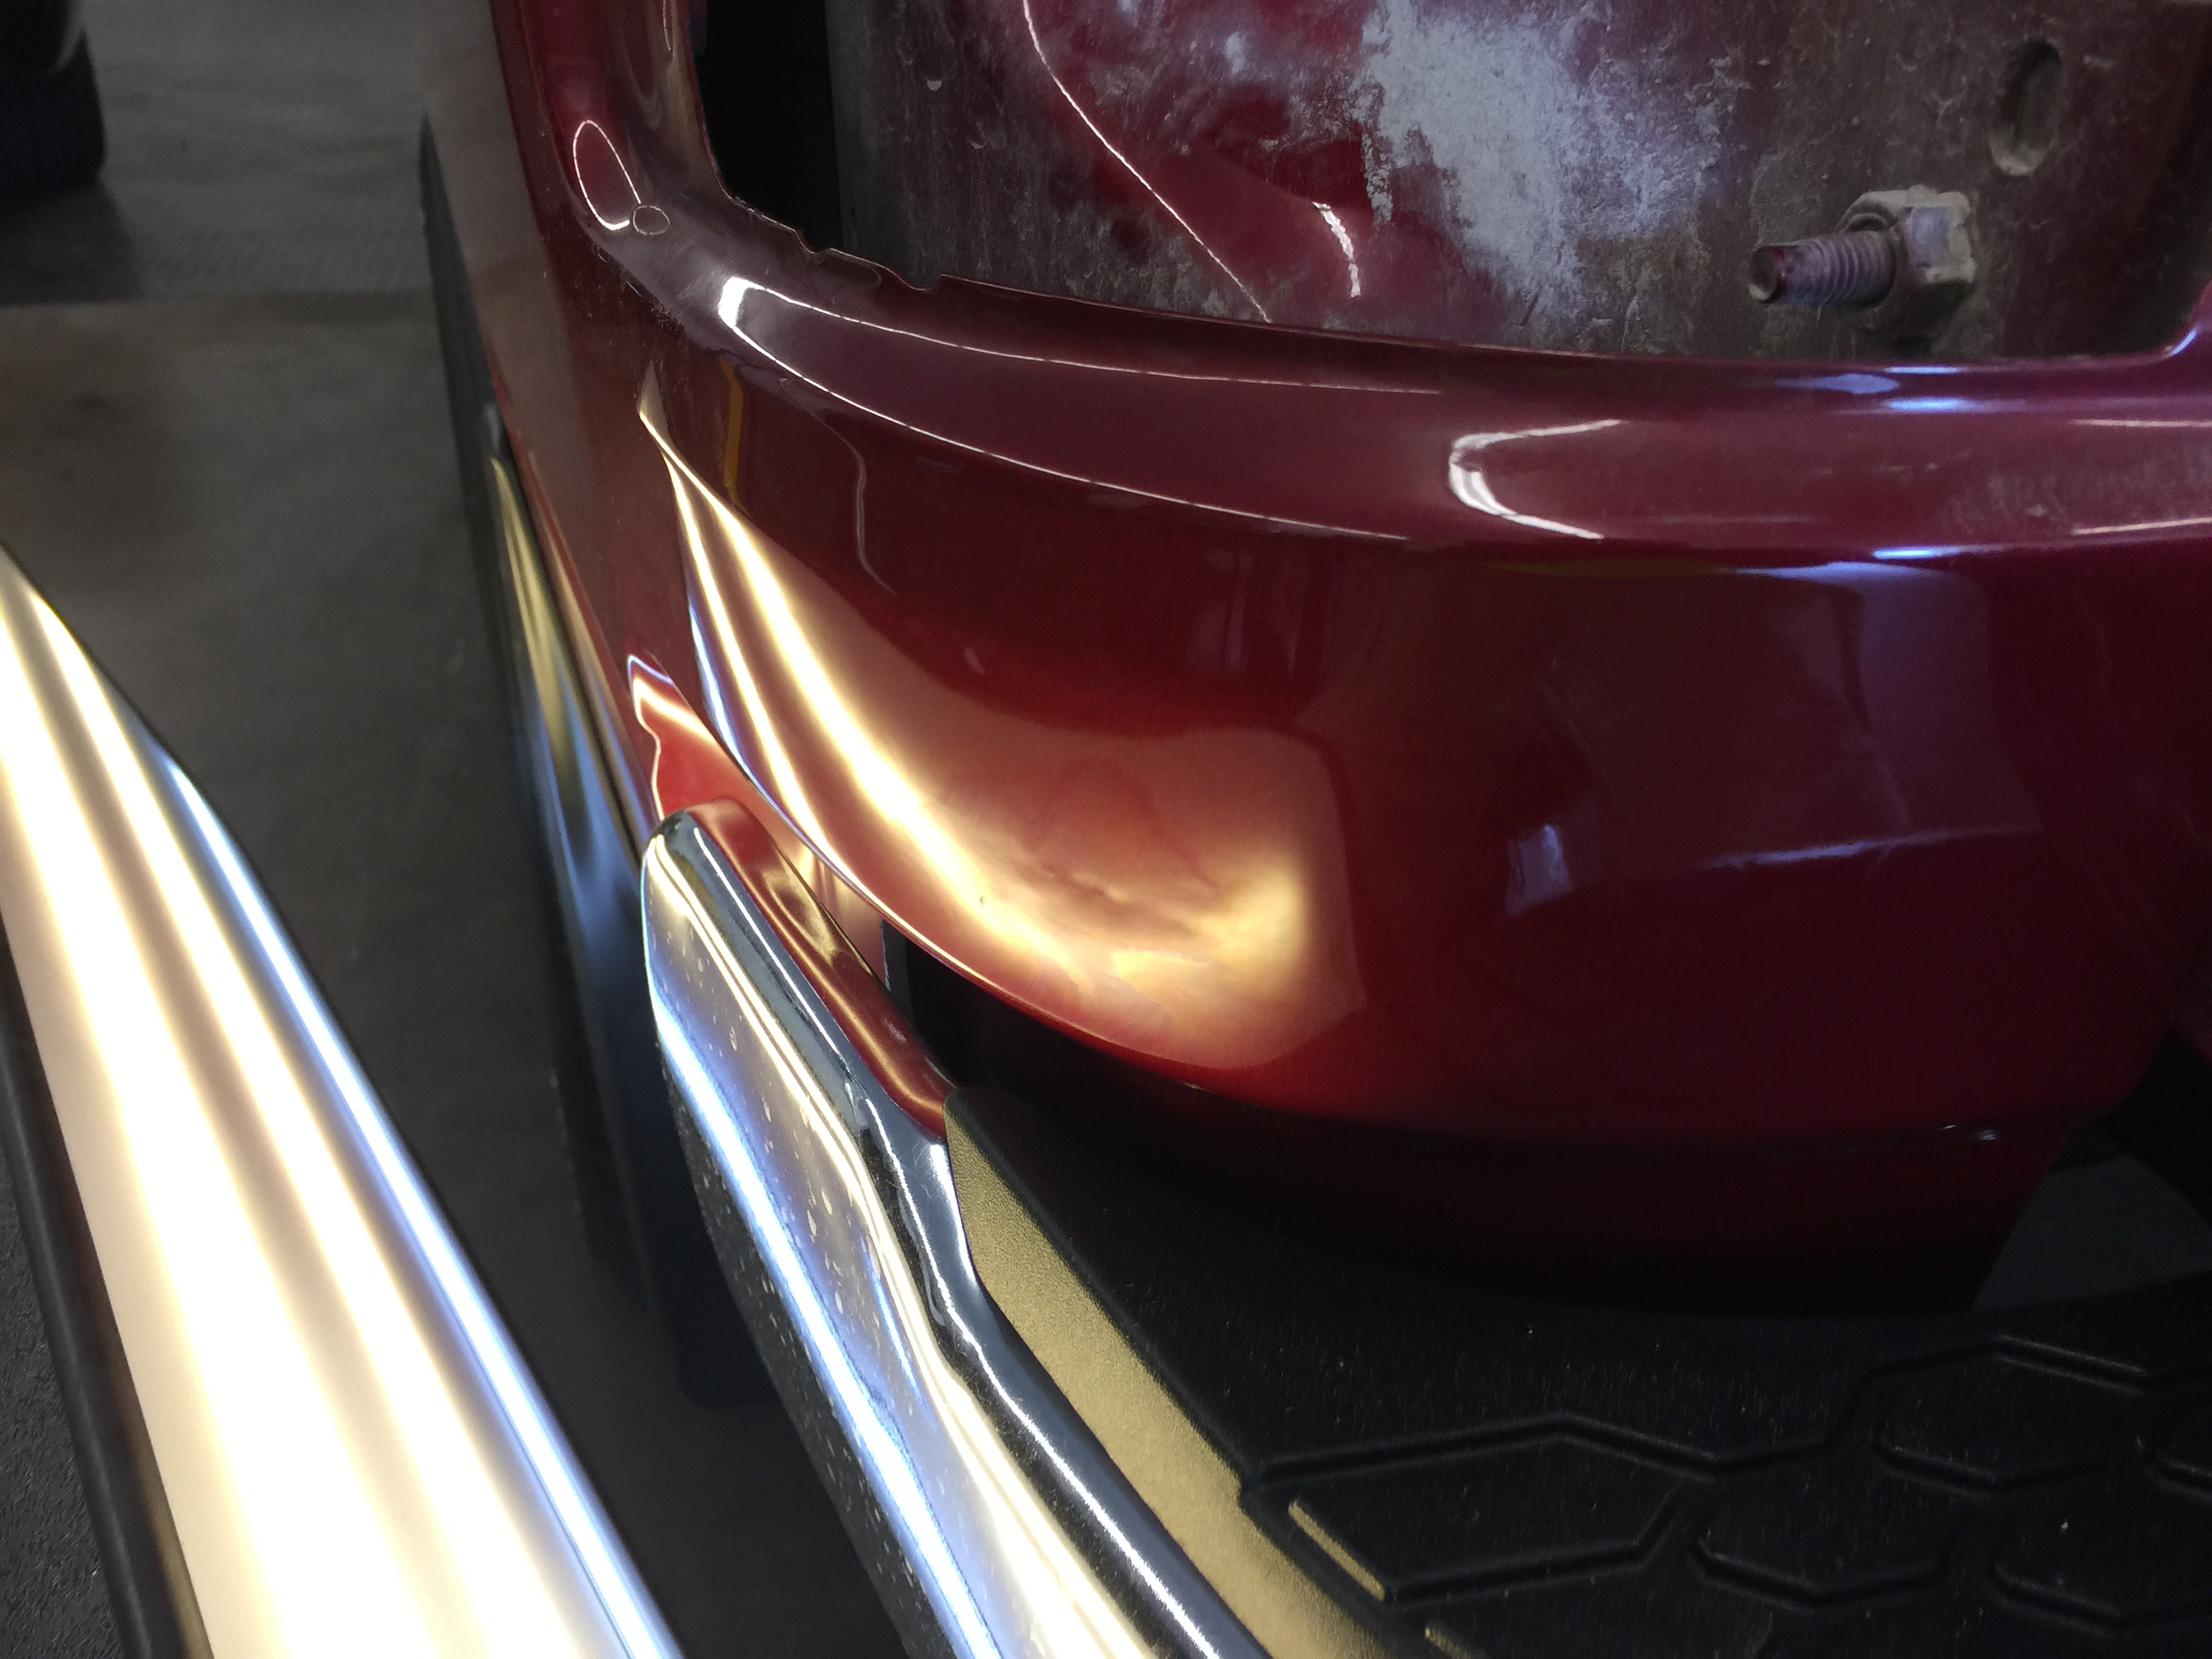 2015 Dodge Ram Dent Removal, Springfield, IL http://217dent.com Bedside Paintless Dent Repair, Mobile dent removal